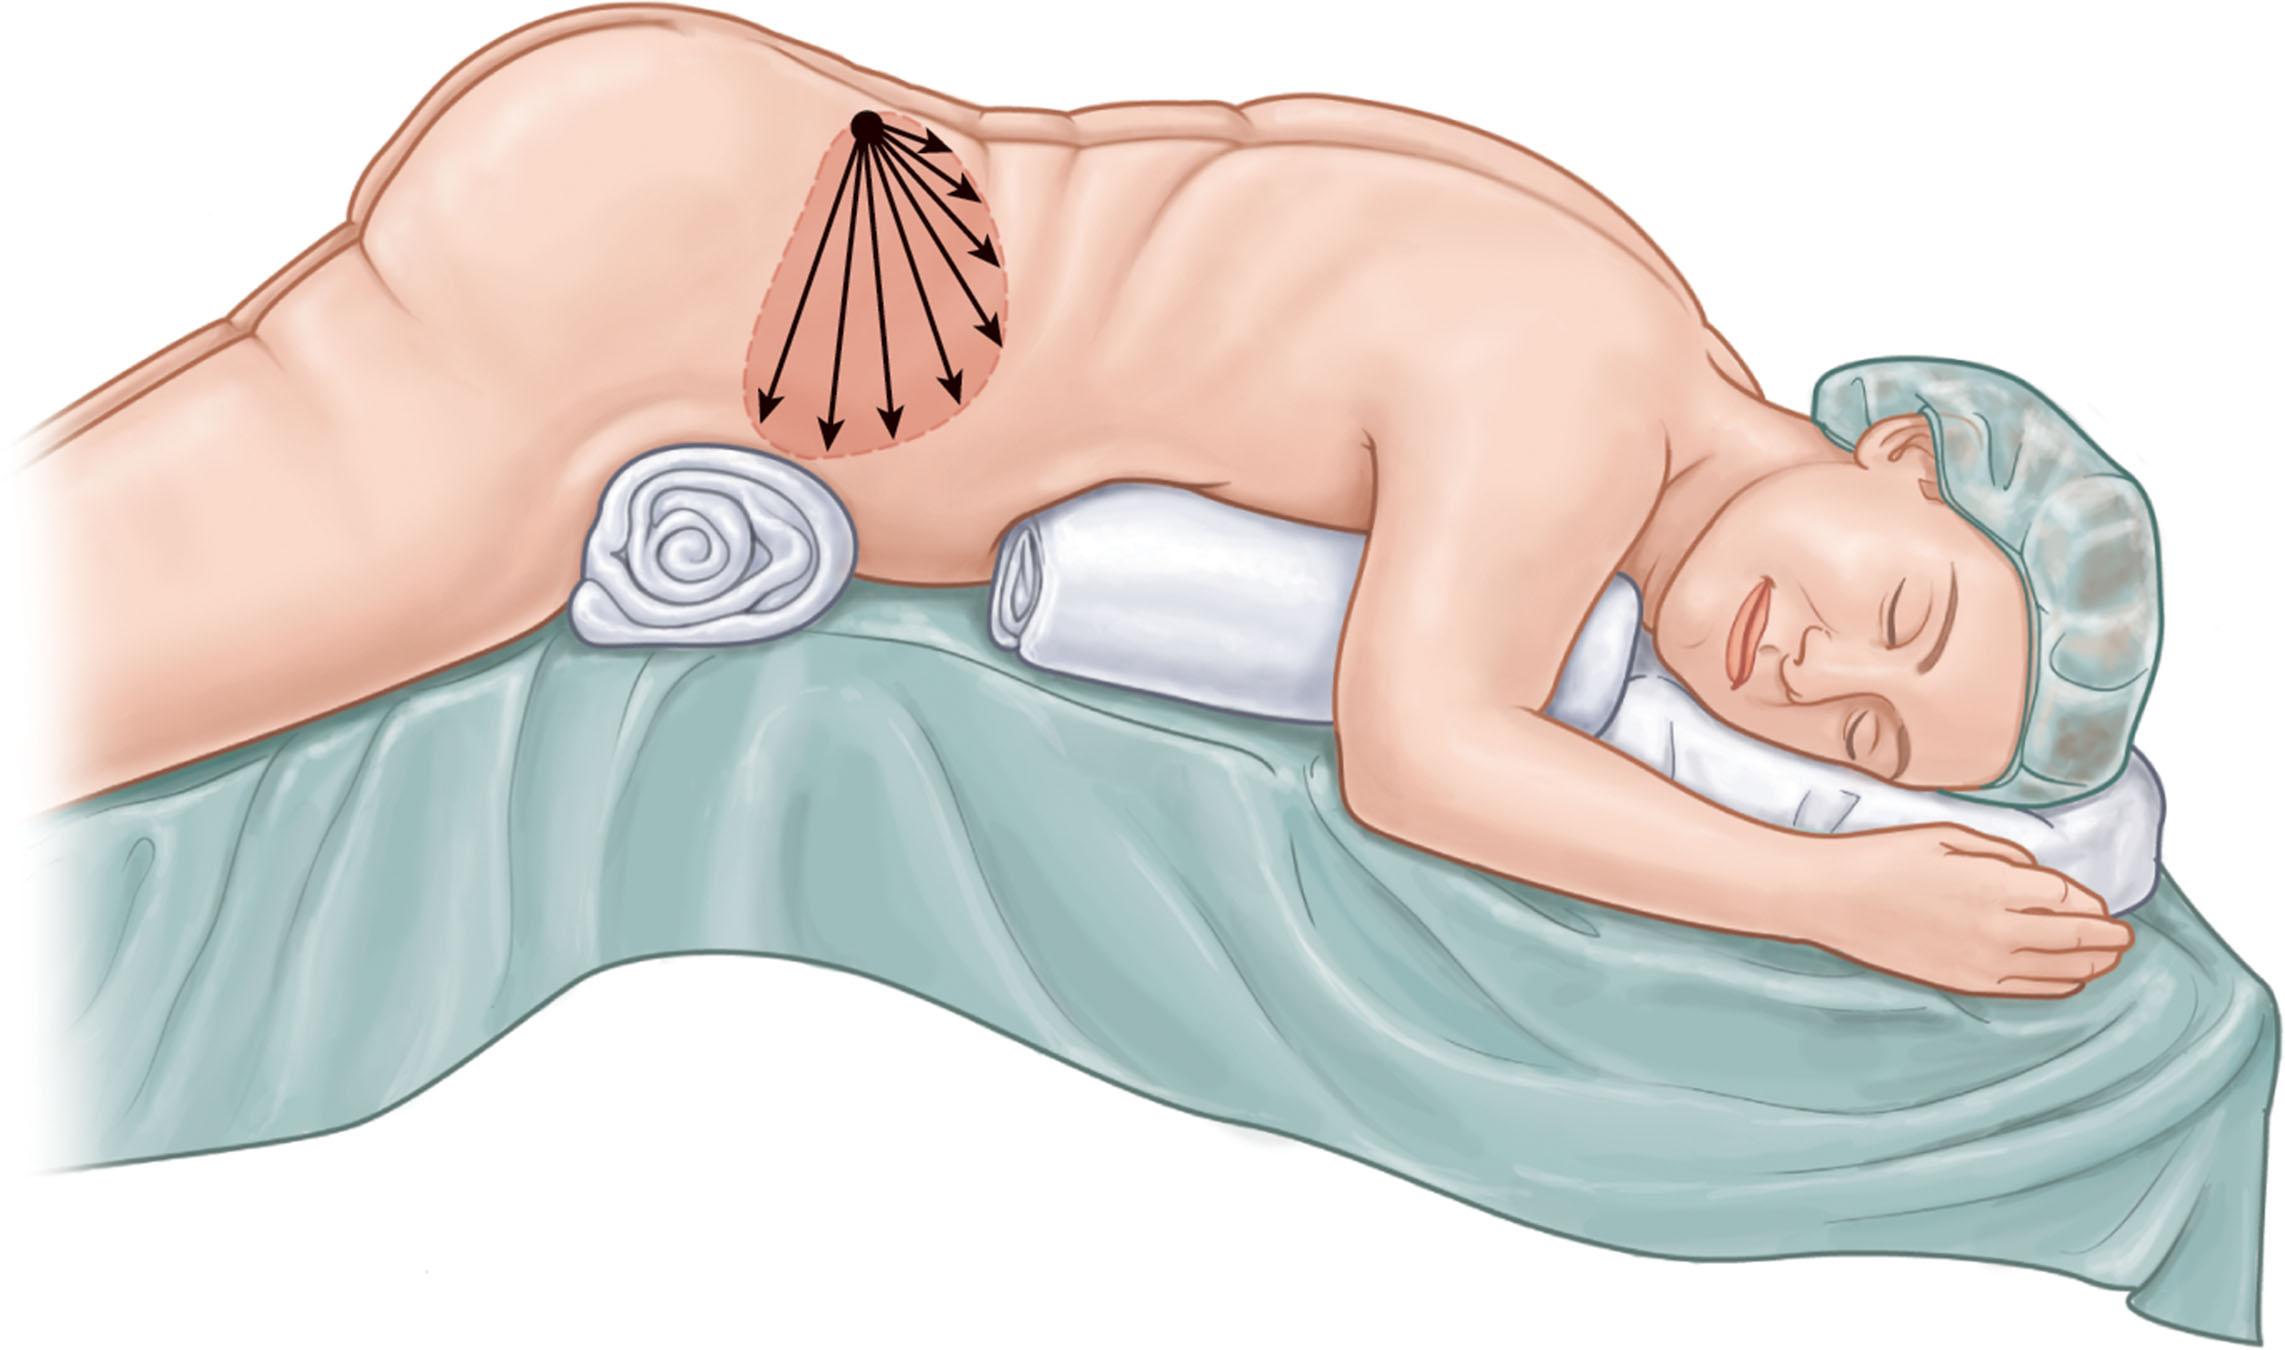 Figure 25.2.9, The patient in the prone position. A large proportion of a liposuction procedure can be performed in this position. Appropriate padding and arm position is important to avoid intraoperative complications.